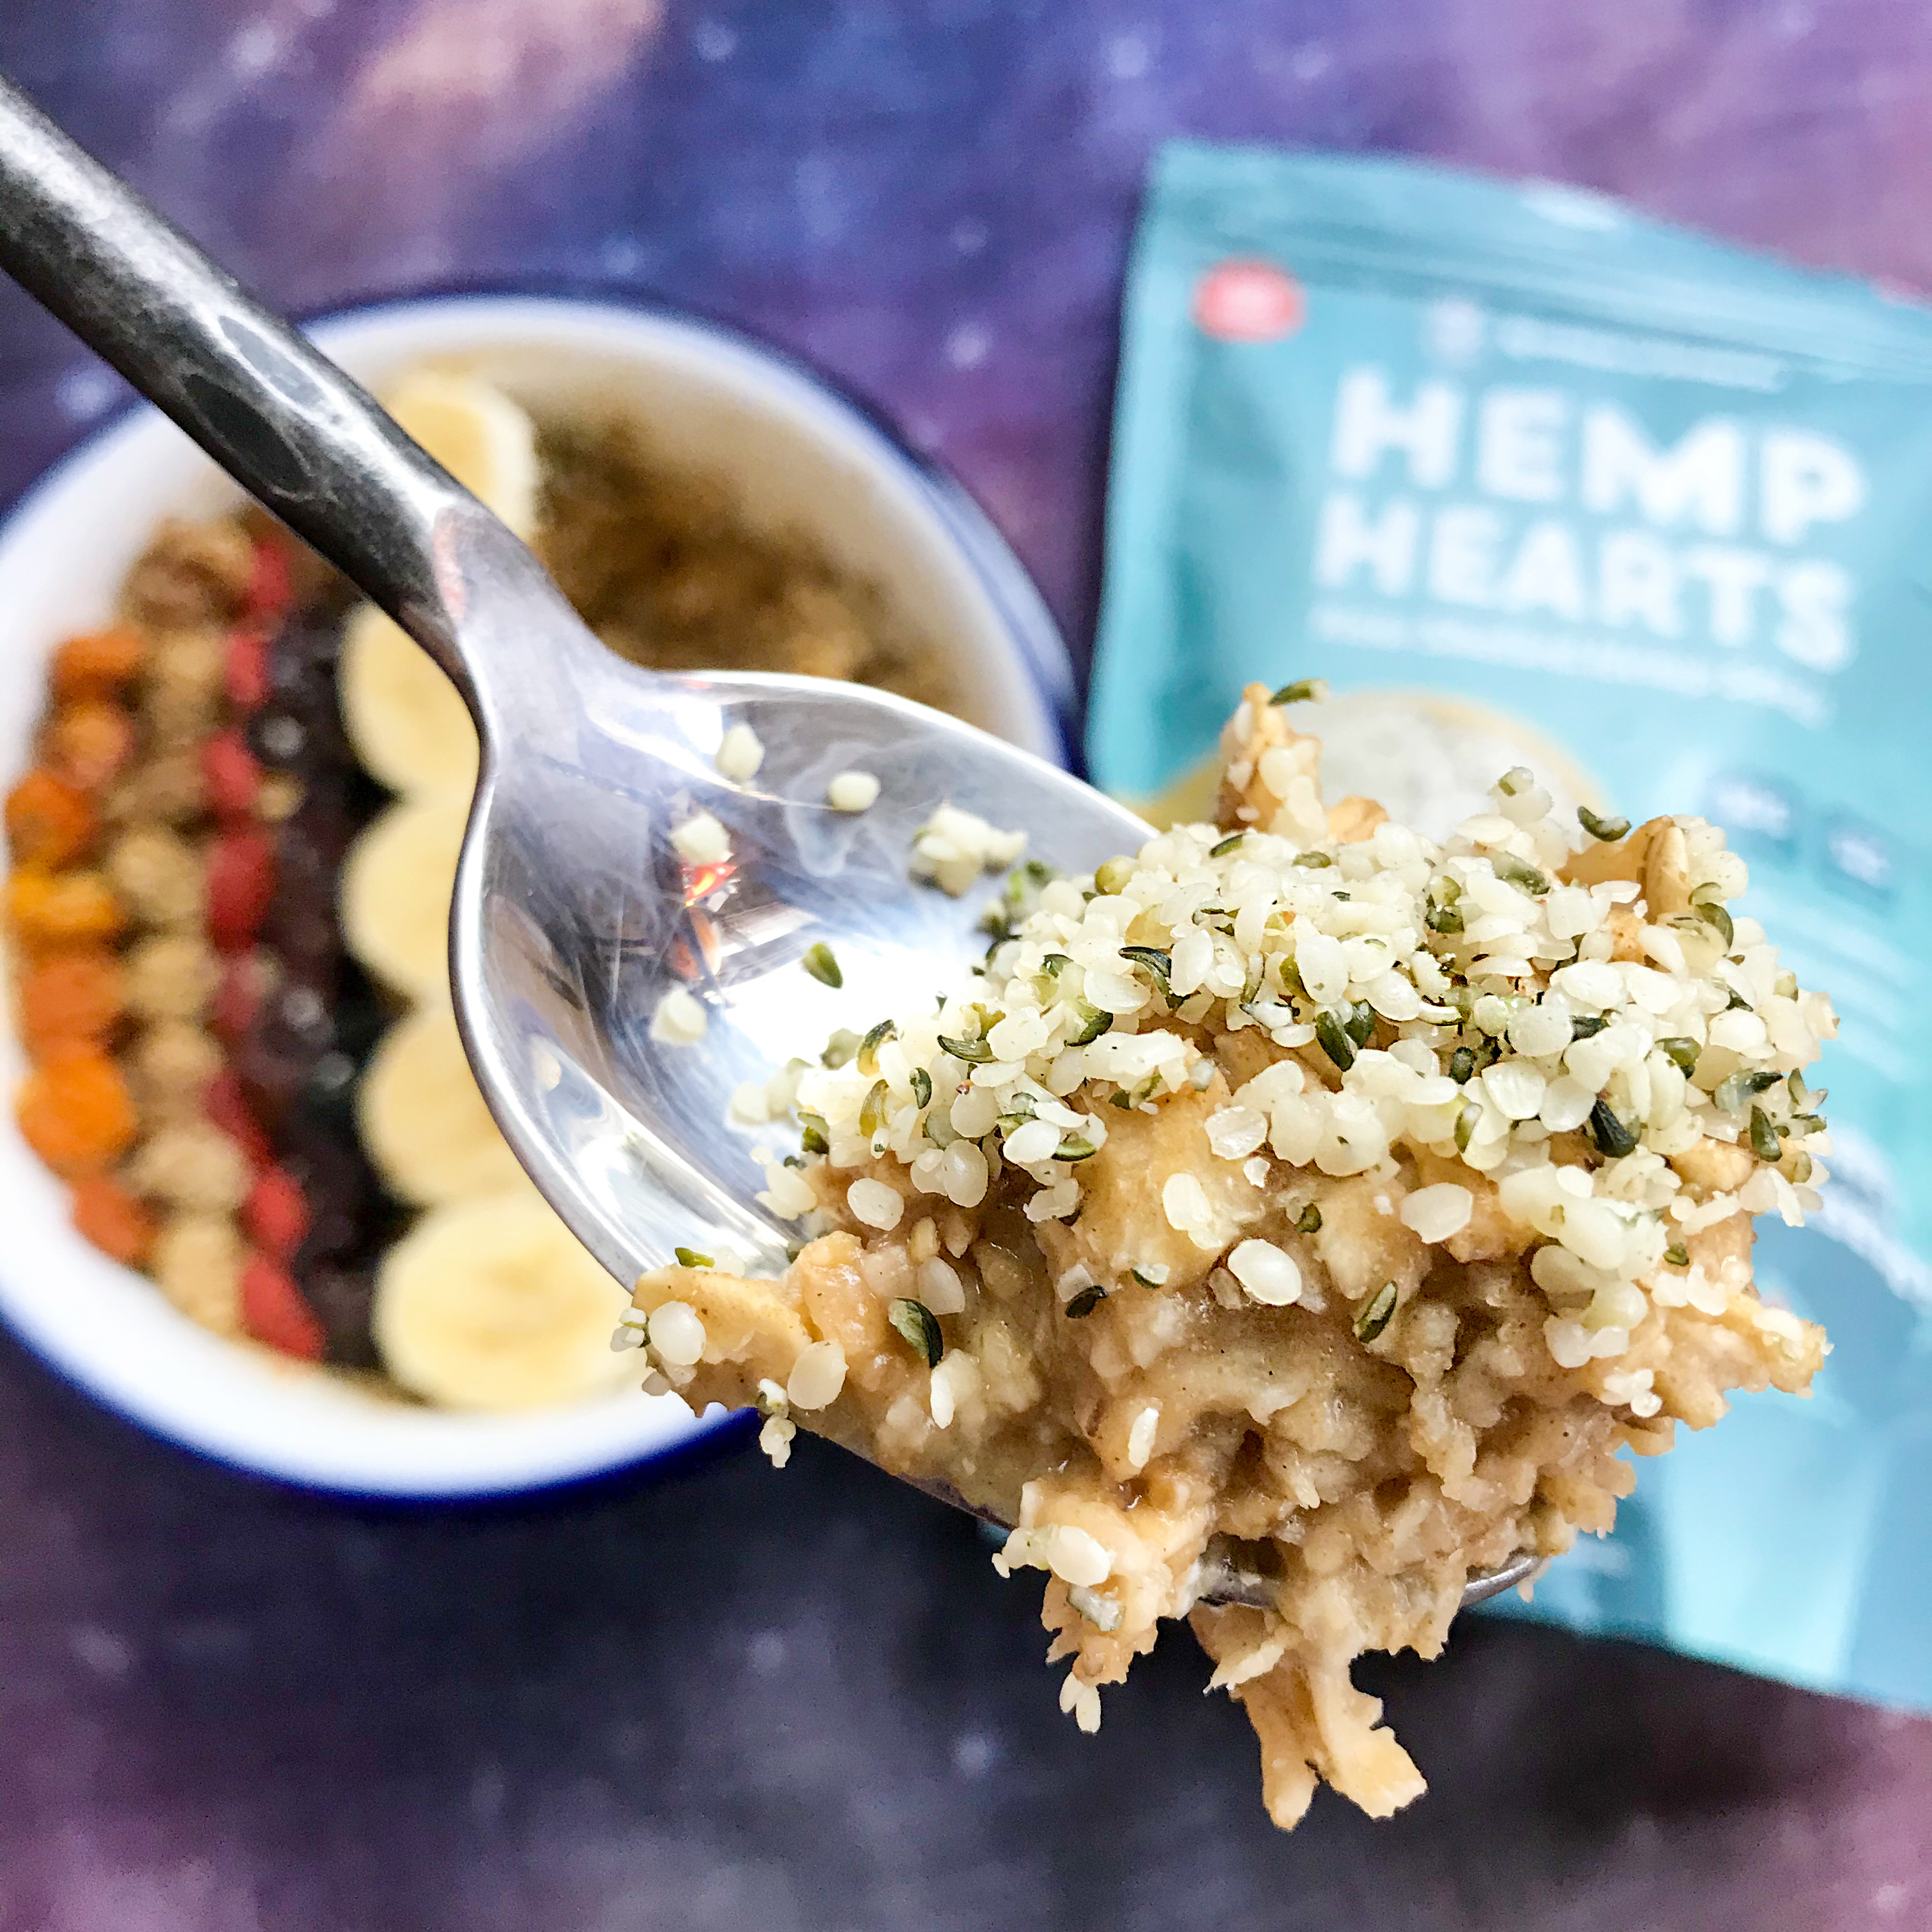 Oatmeal and hemp hearts in the spoon, with the bowl and hemp hearts package in the background.